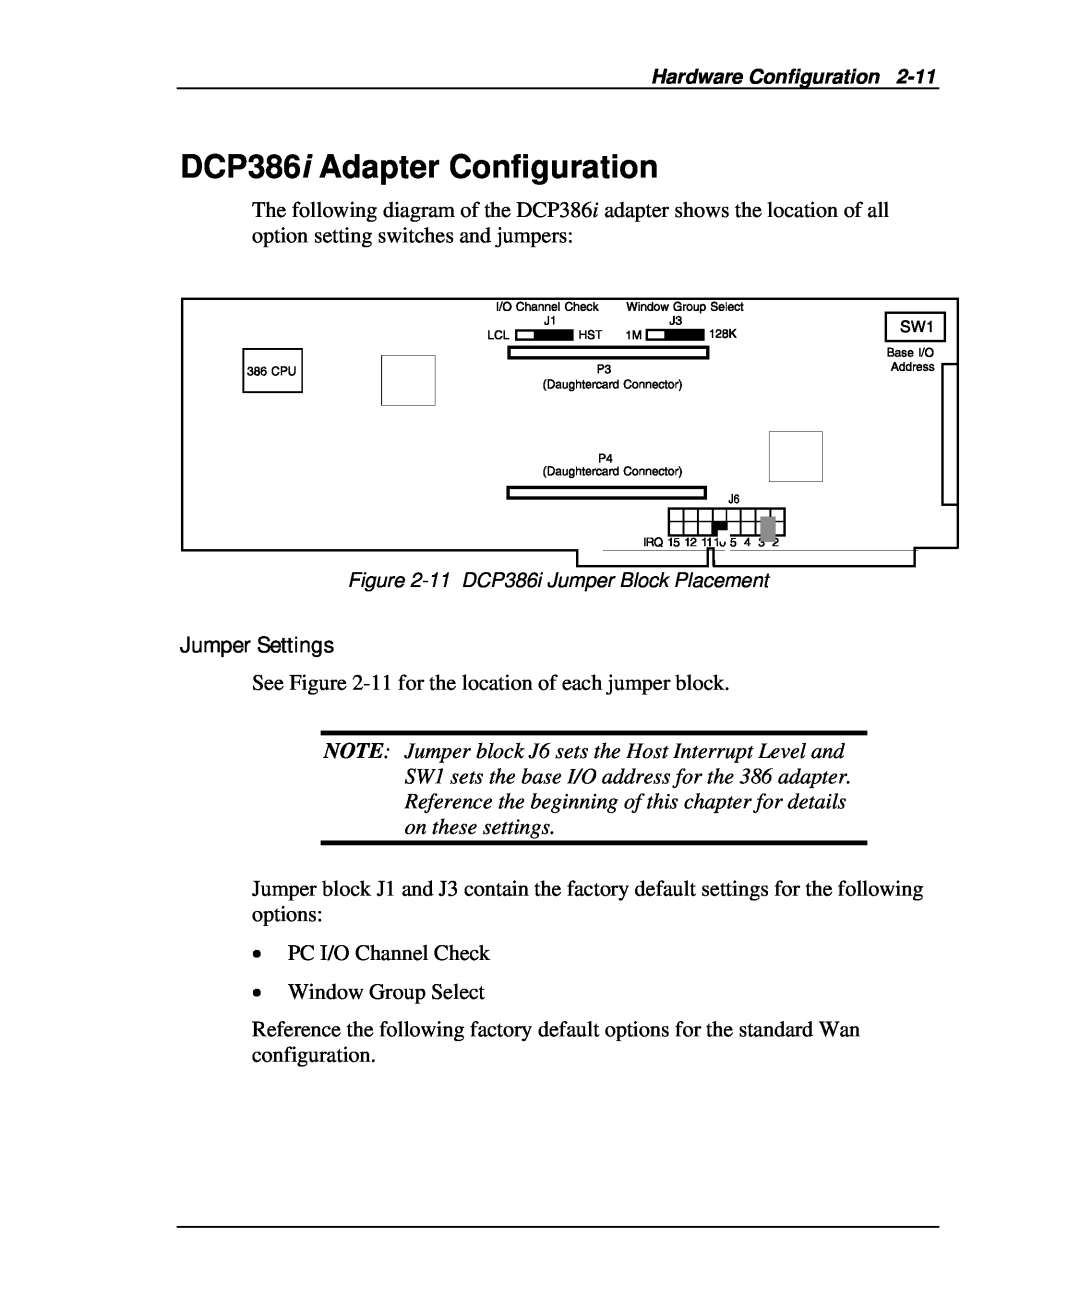 Emulex DCP_link manual DCP386i Adapter Configuration, Jumper Settings 